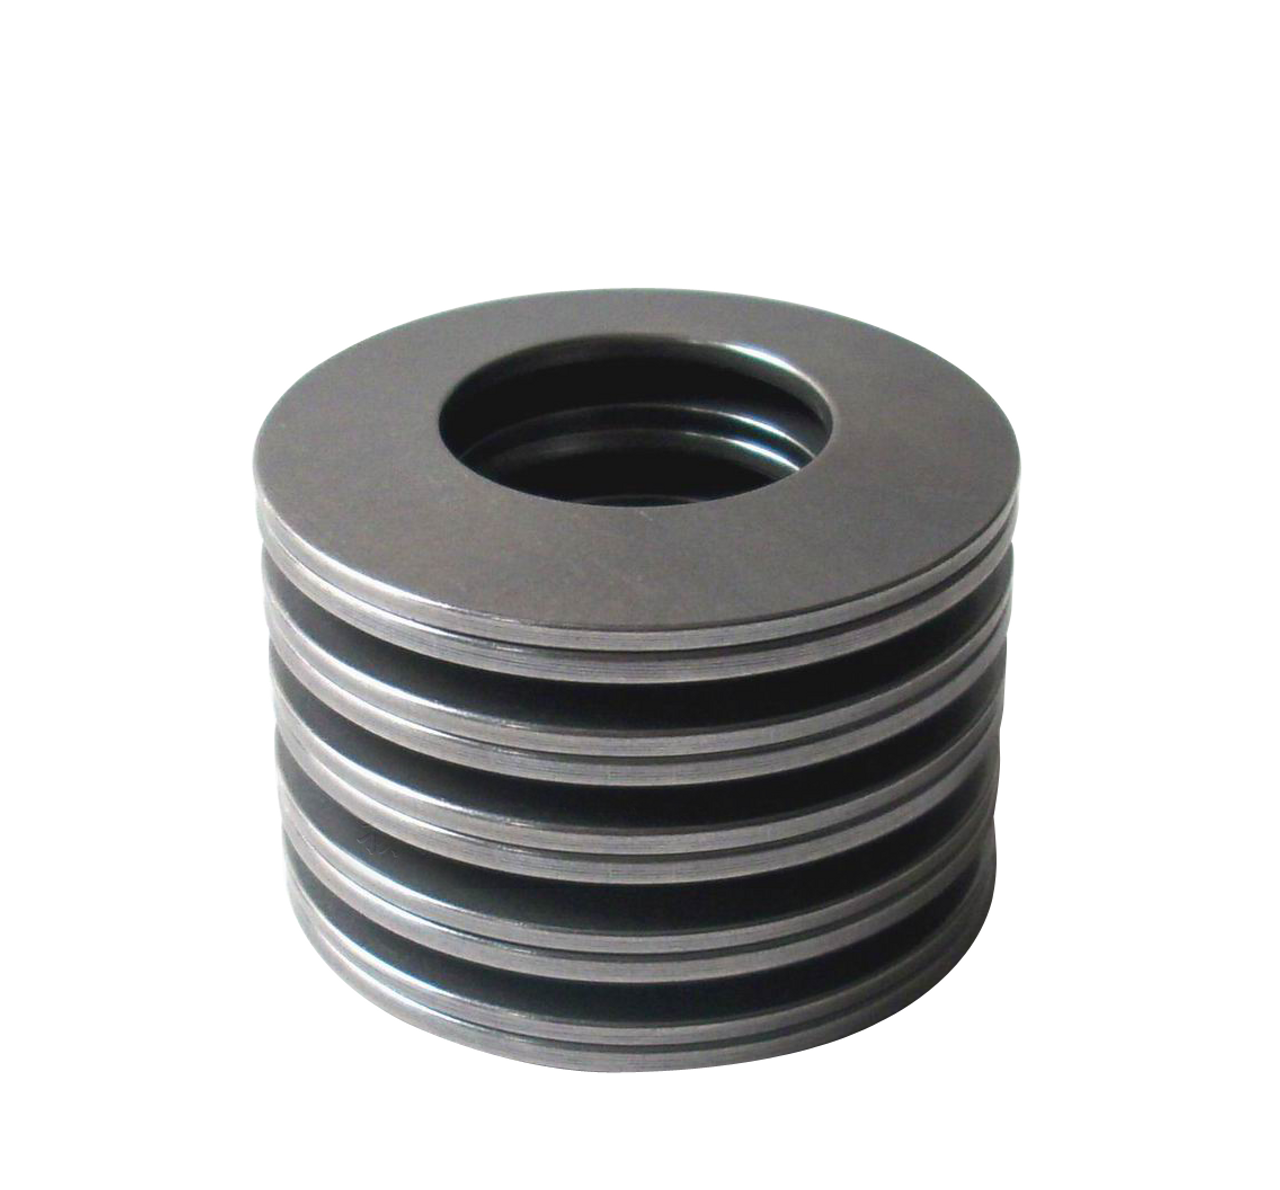 125mm Disc Spring (DIN 2093) Conical Washer  DS127.0-250-11